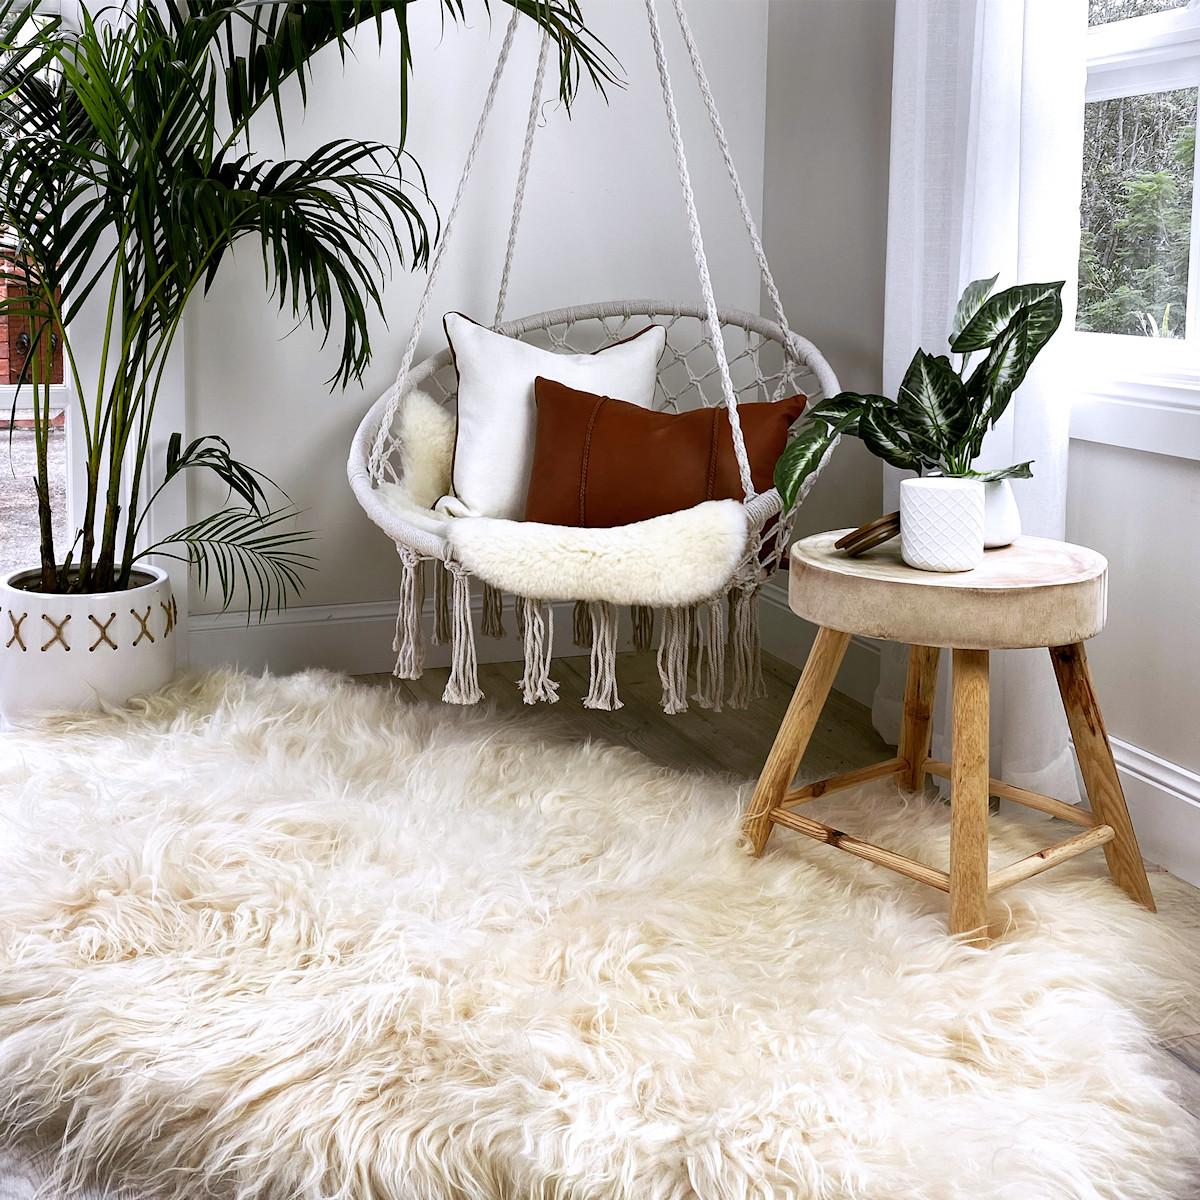 This Icelandic sheepskin rug is sustainable, natural living at its finest. This natural white sheepskin rug is handcrafted from the highest quality long wool Icelandic sheepskin creating an extraordinary shaggy area rug with a wool pile range from 8